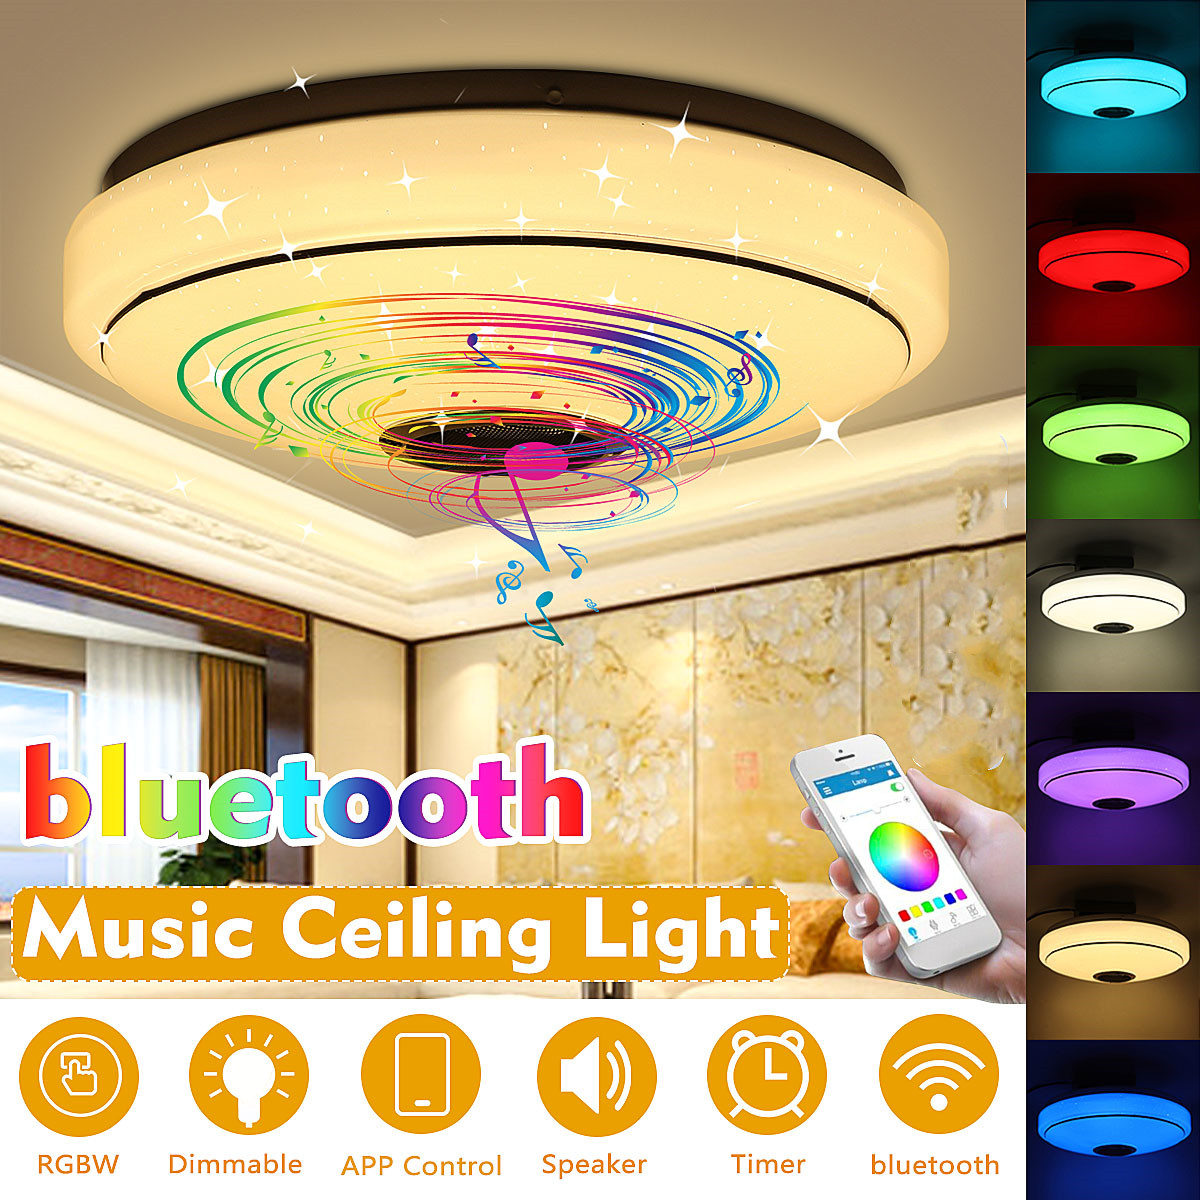 Dimmable-RGBW-LED-Music-Ceiling-Lights-with-bluetooth-Speaker-Cellphone-APP-Control-Color-Changing-L-1742404-1